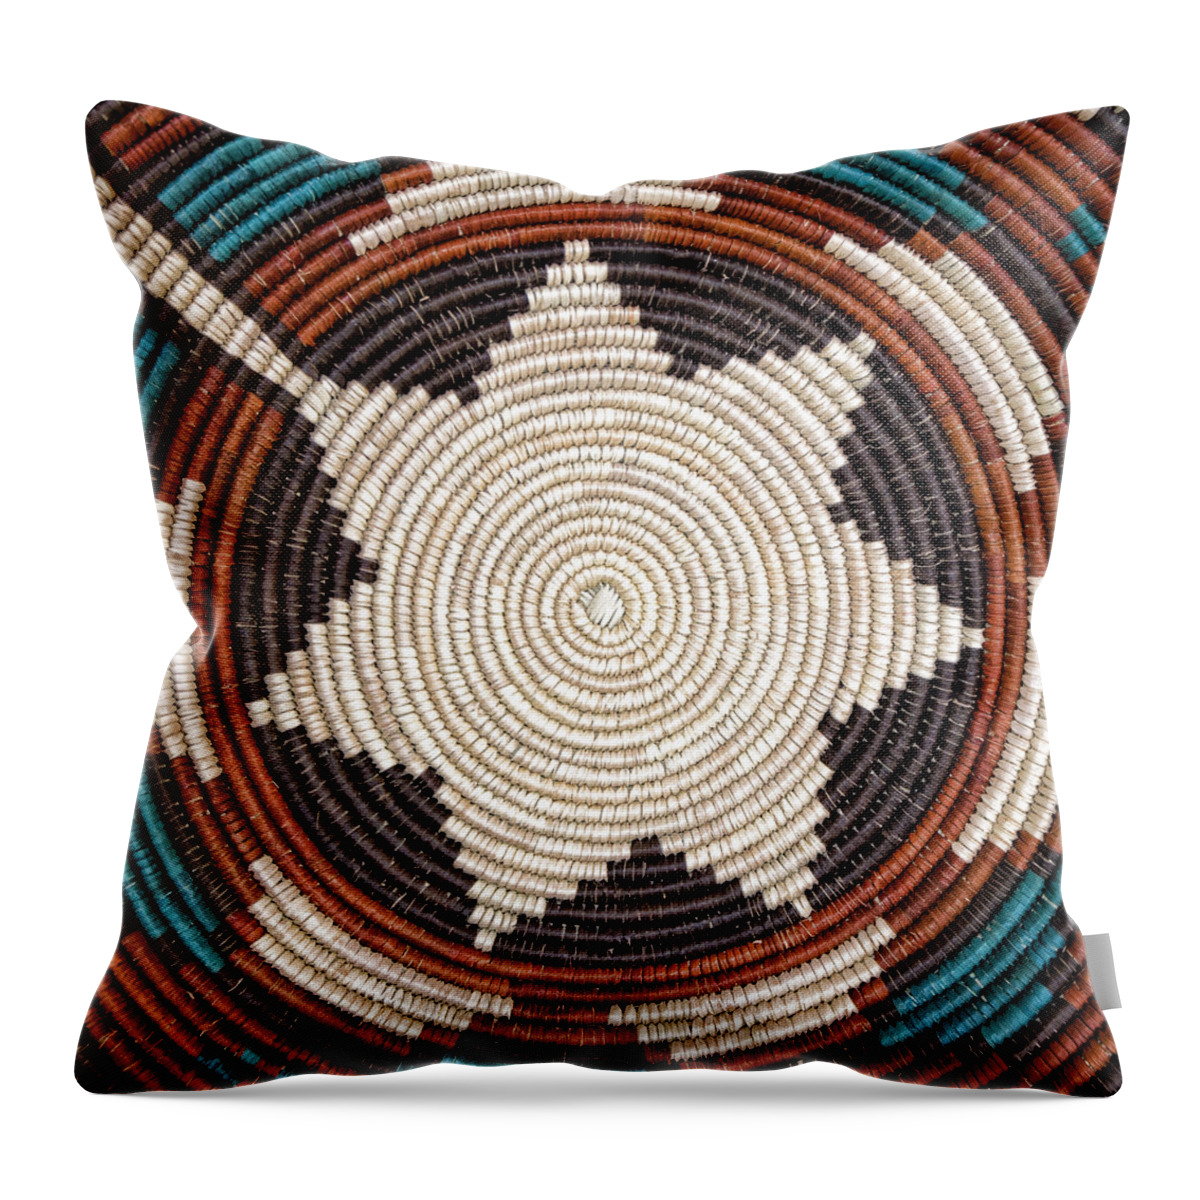 Basket Throw Pillow featuring the photograph Southwestern Basket Detail #2 by Carol Leigh